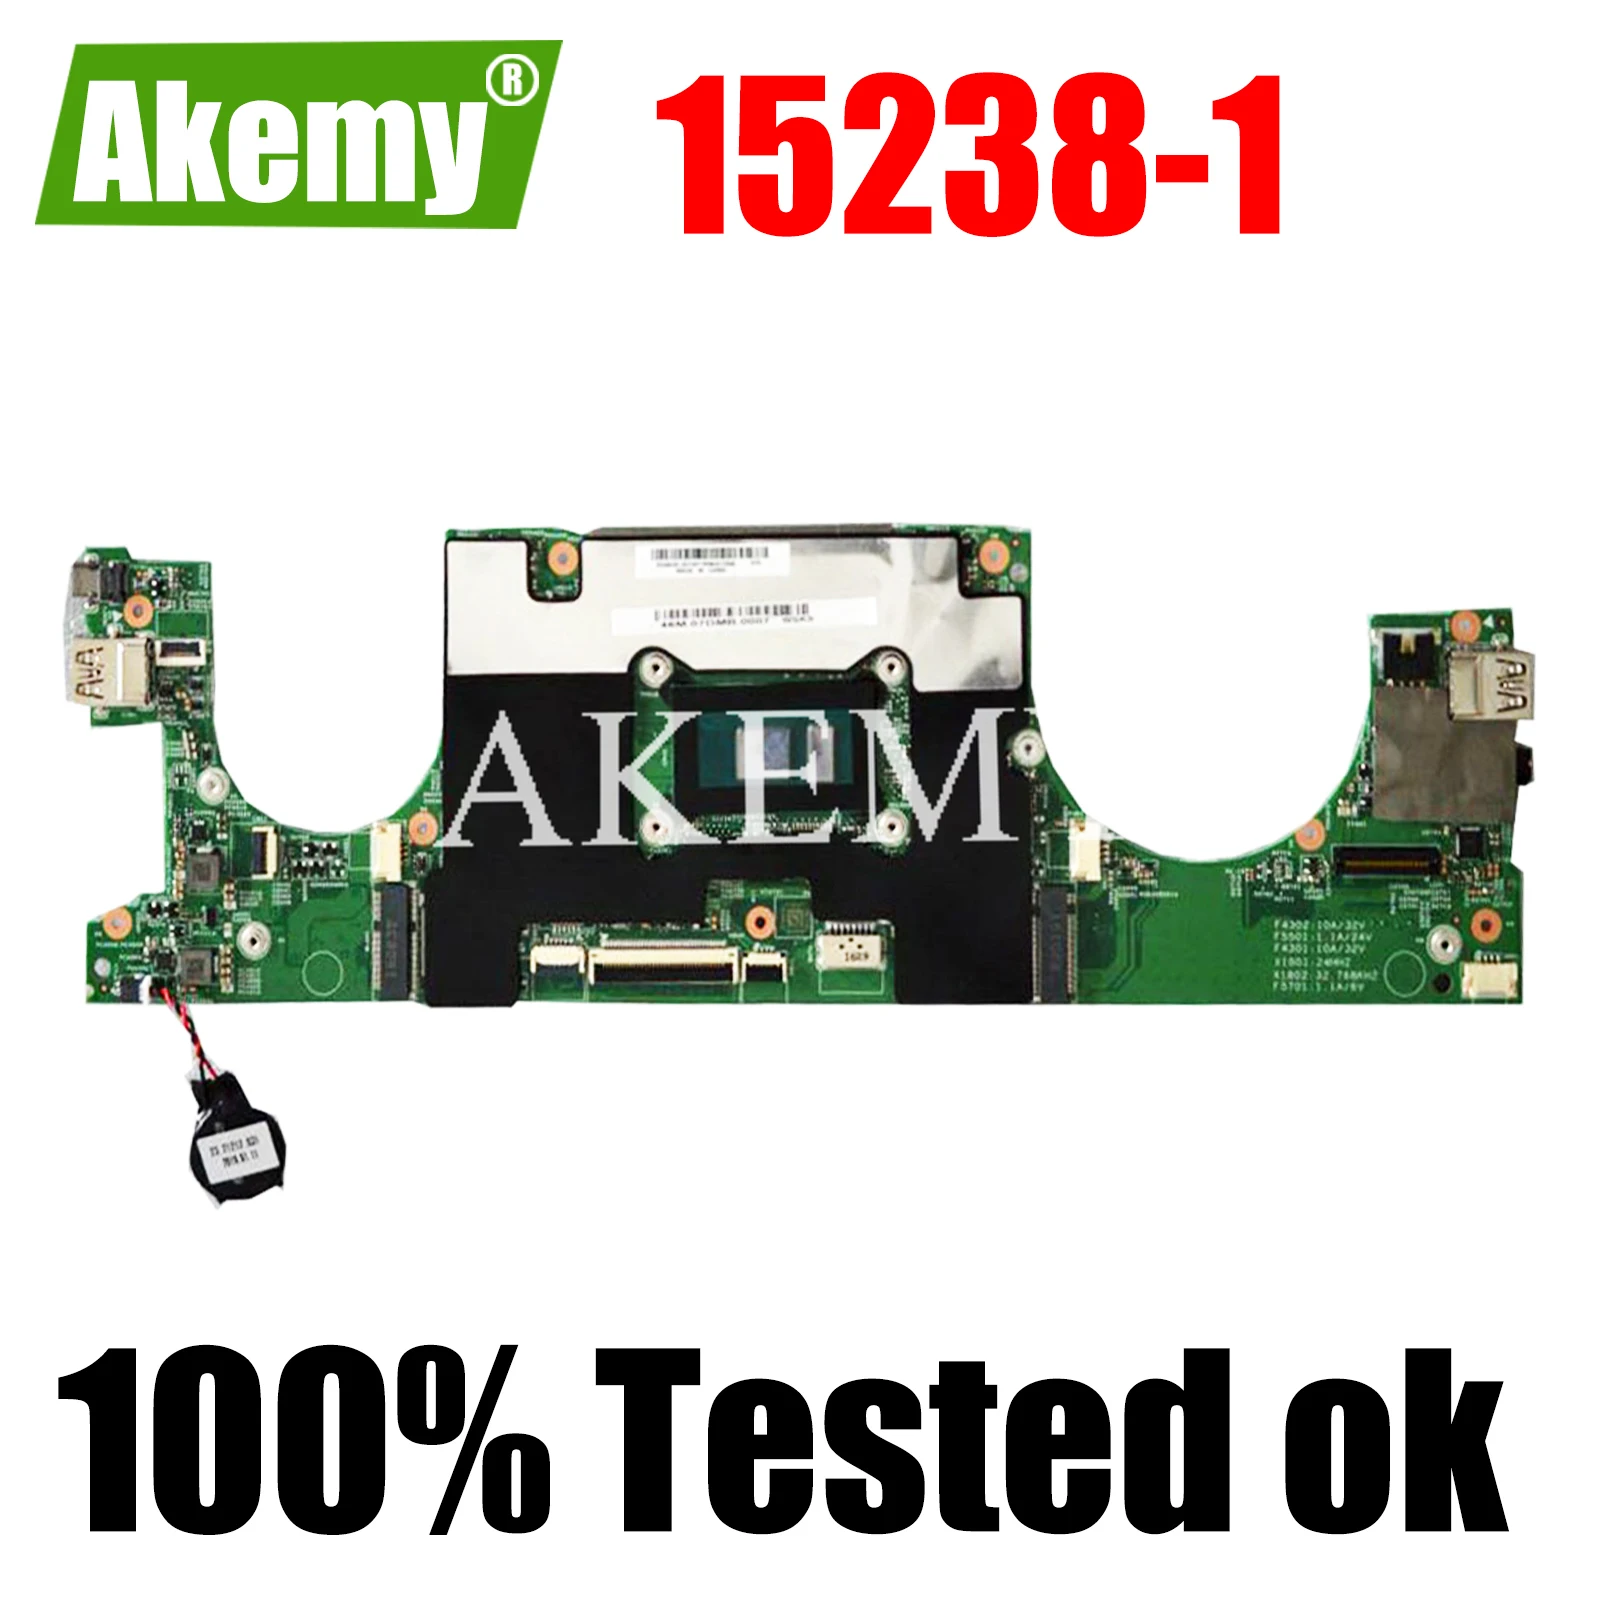 

LS710 15238-1 Motherboard For Lenovo Ideapad 710S-13ISK xiaoxin air 13 Laptop Motherboard I5-6200 CPU 8GB Tested original